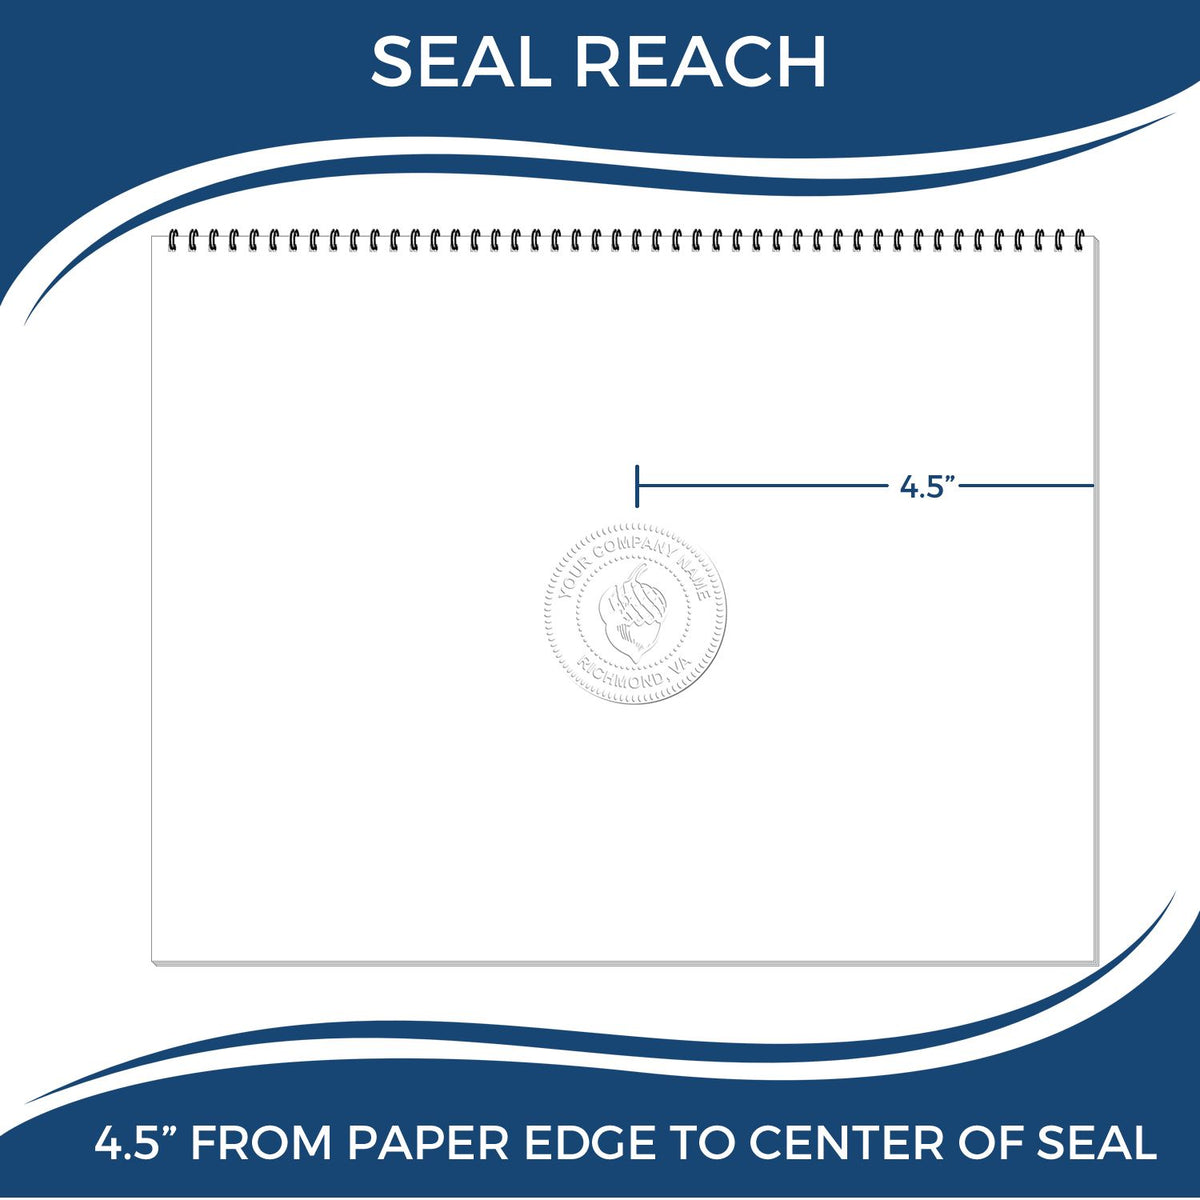 An infographic showing the seal reach which is represented by a ruler and a miniature seal image of the State of Iowa Extended Long Reach Geologist Seal